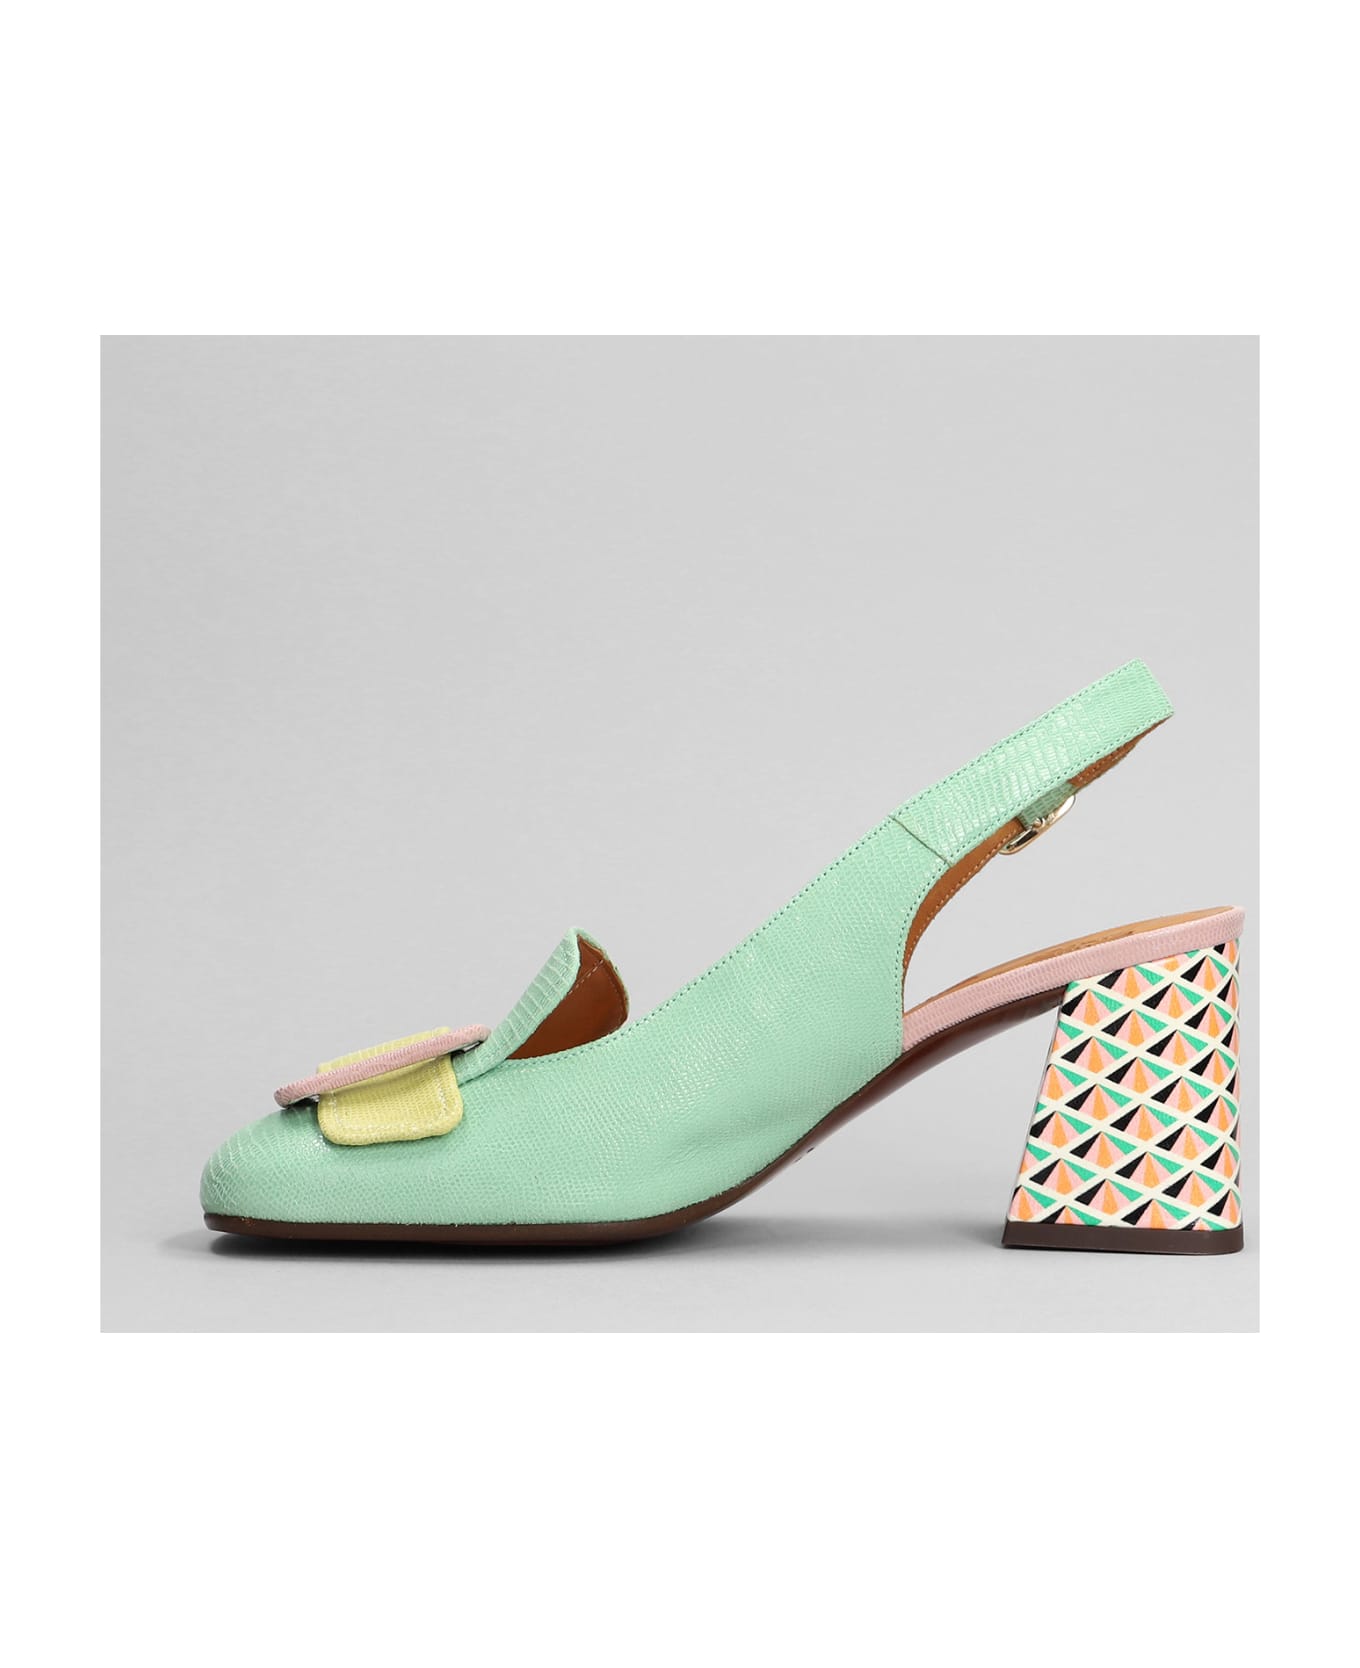 Chie Mihara Suzan Pumps In Green Leather - green ハイヒール